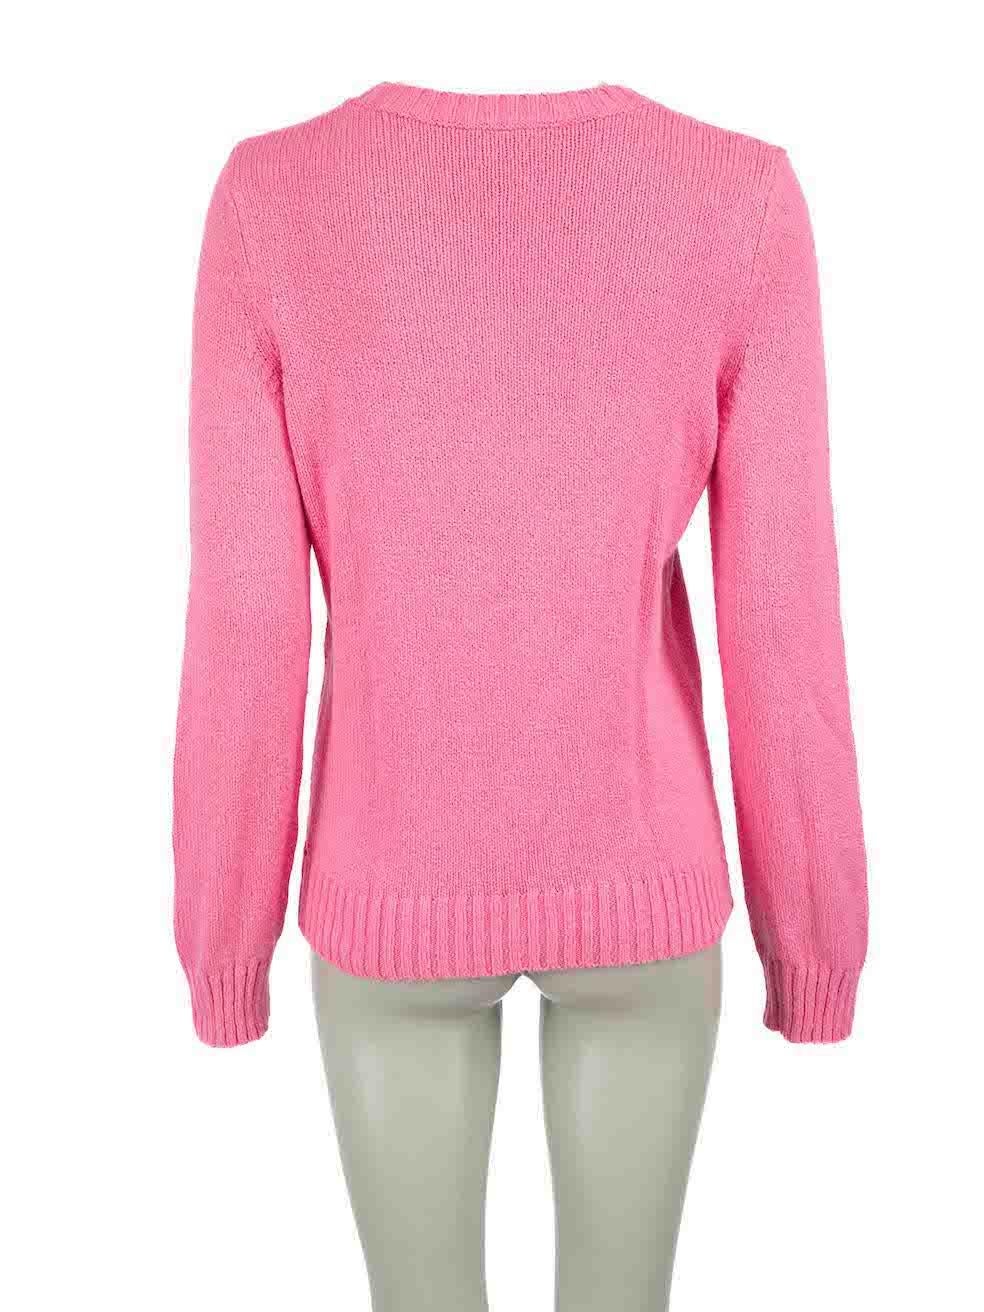 A.P.C. Pink Crew Neck Knit Jumper Size L In Good Condition For Sale In London, GB